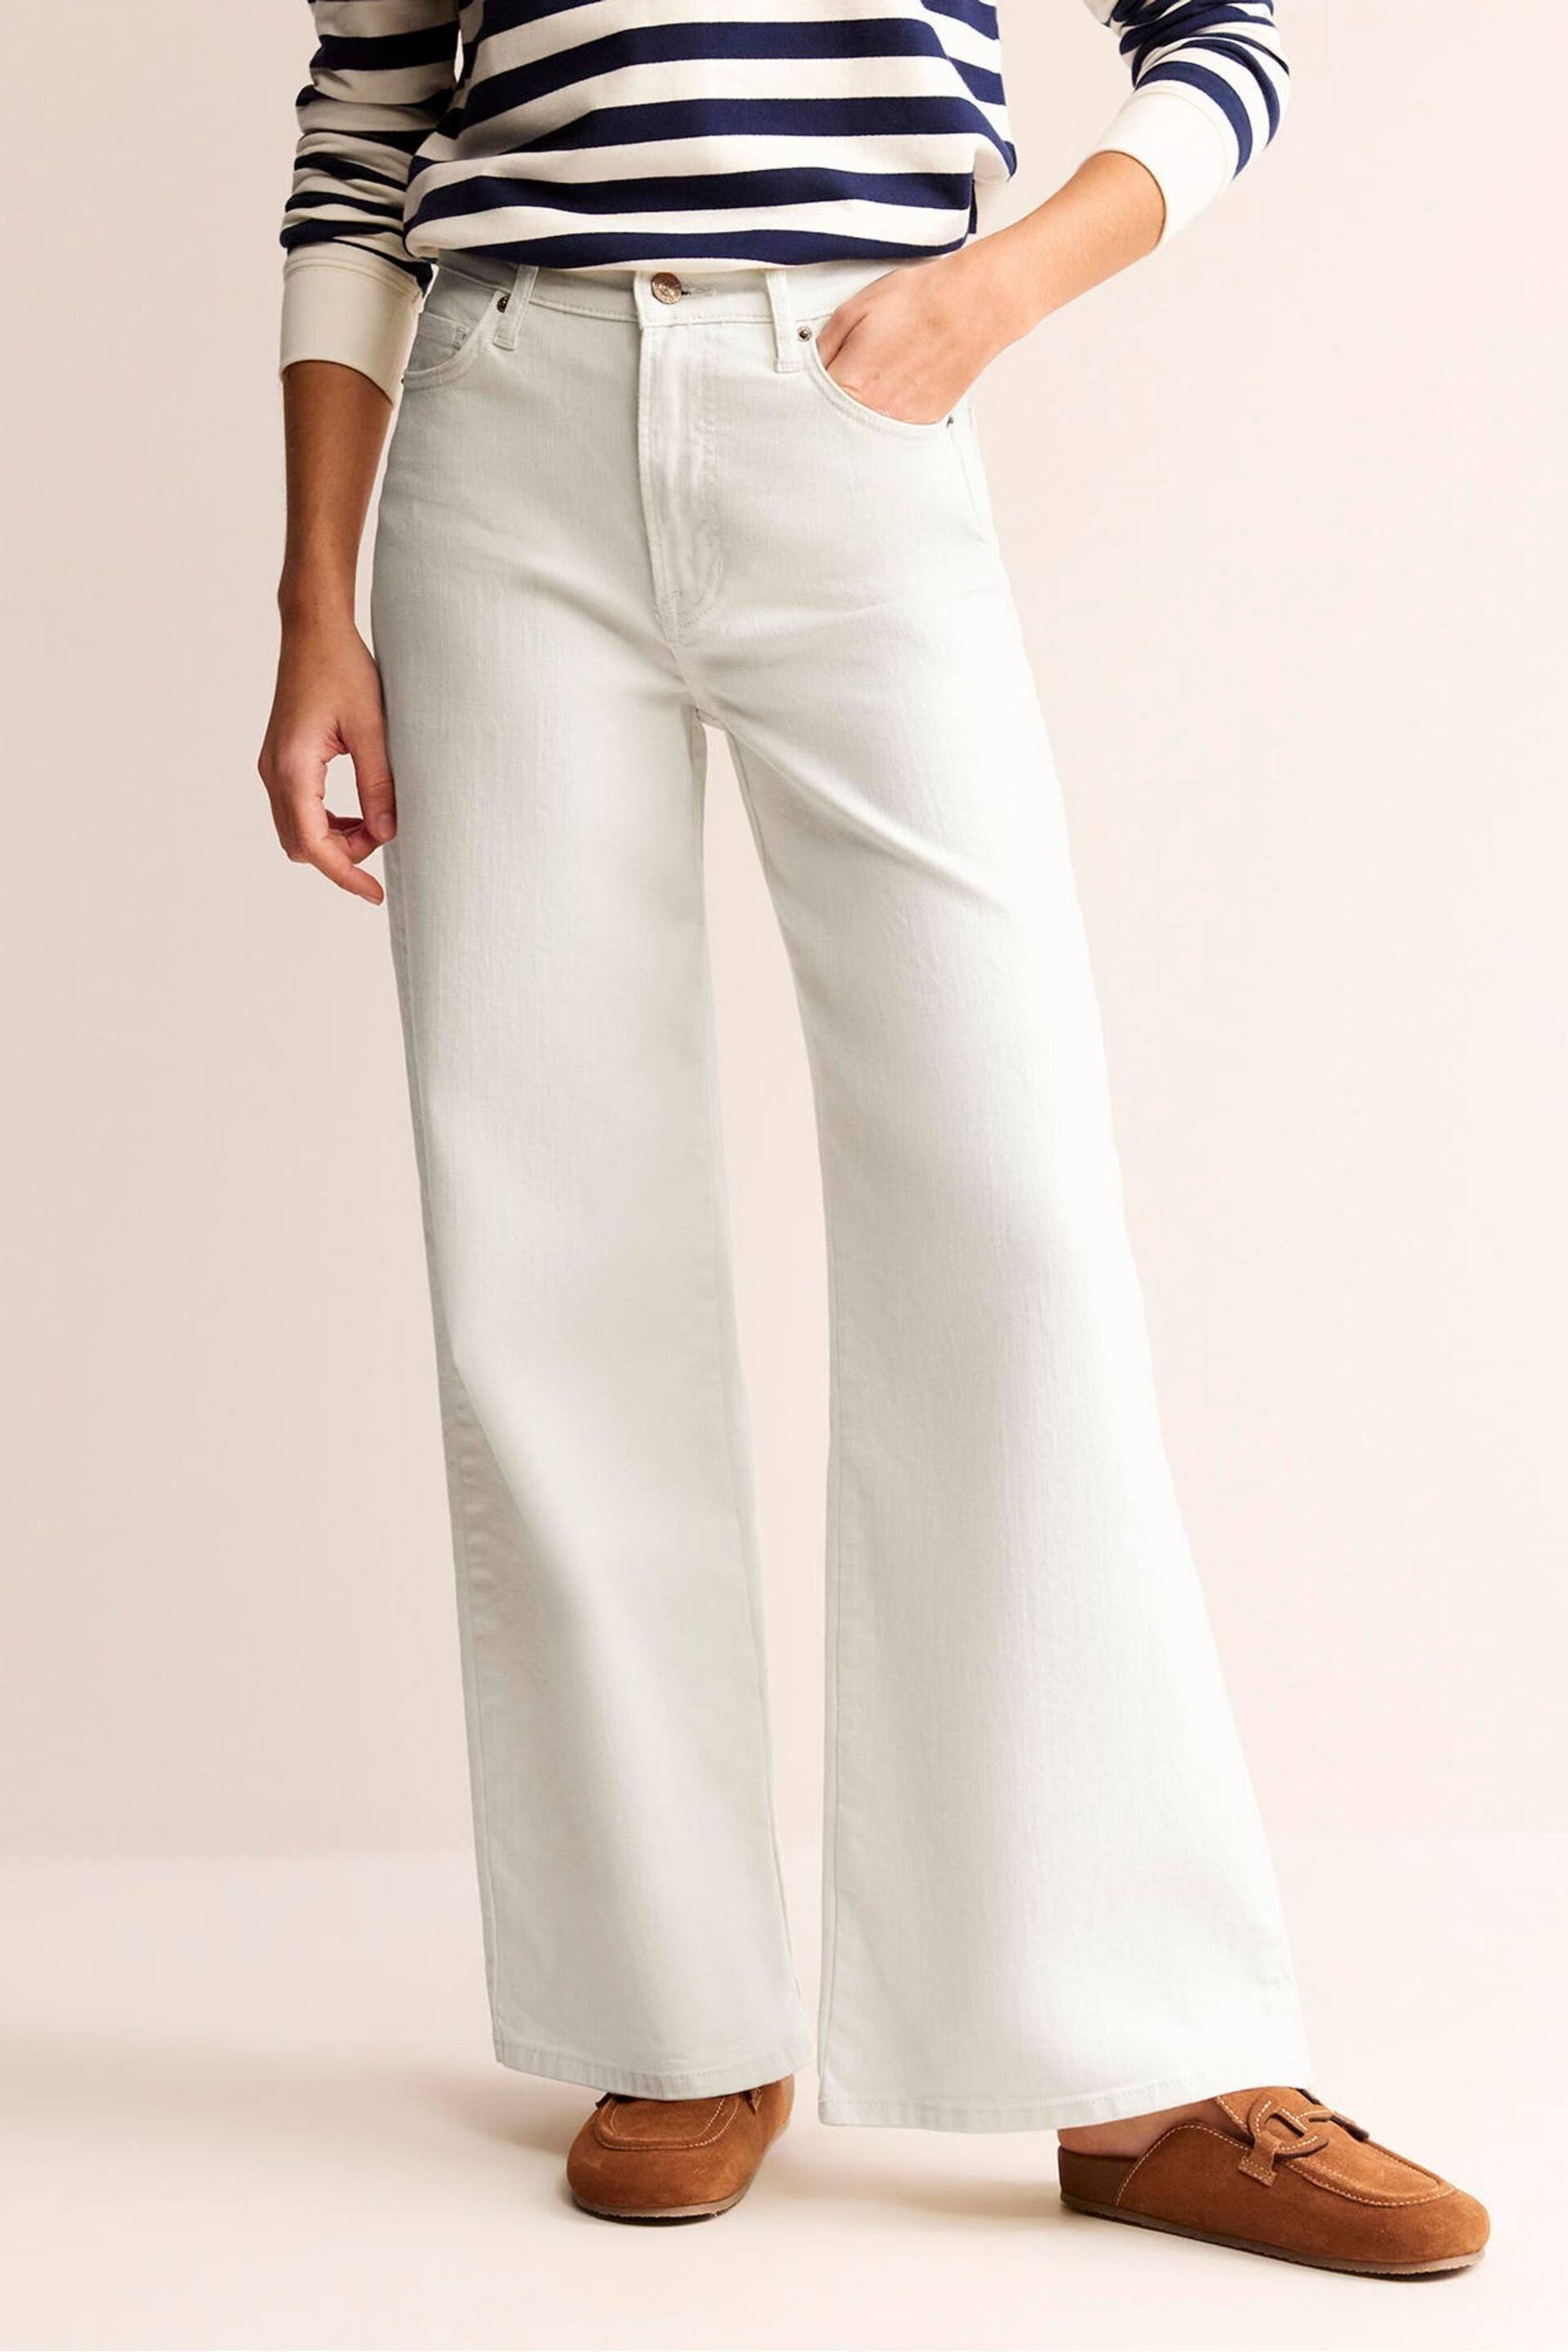 Boden White High Rise Wide Leg Jeans - Image 1 of 8